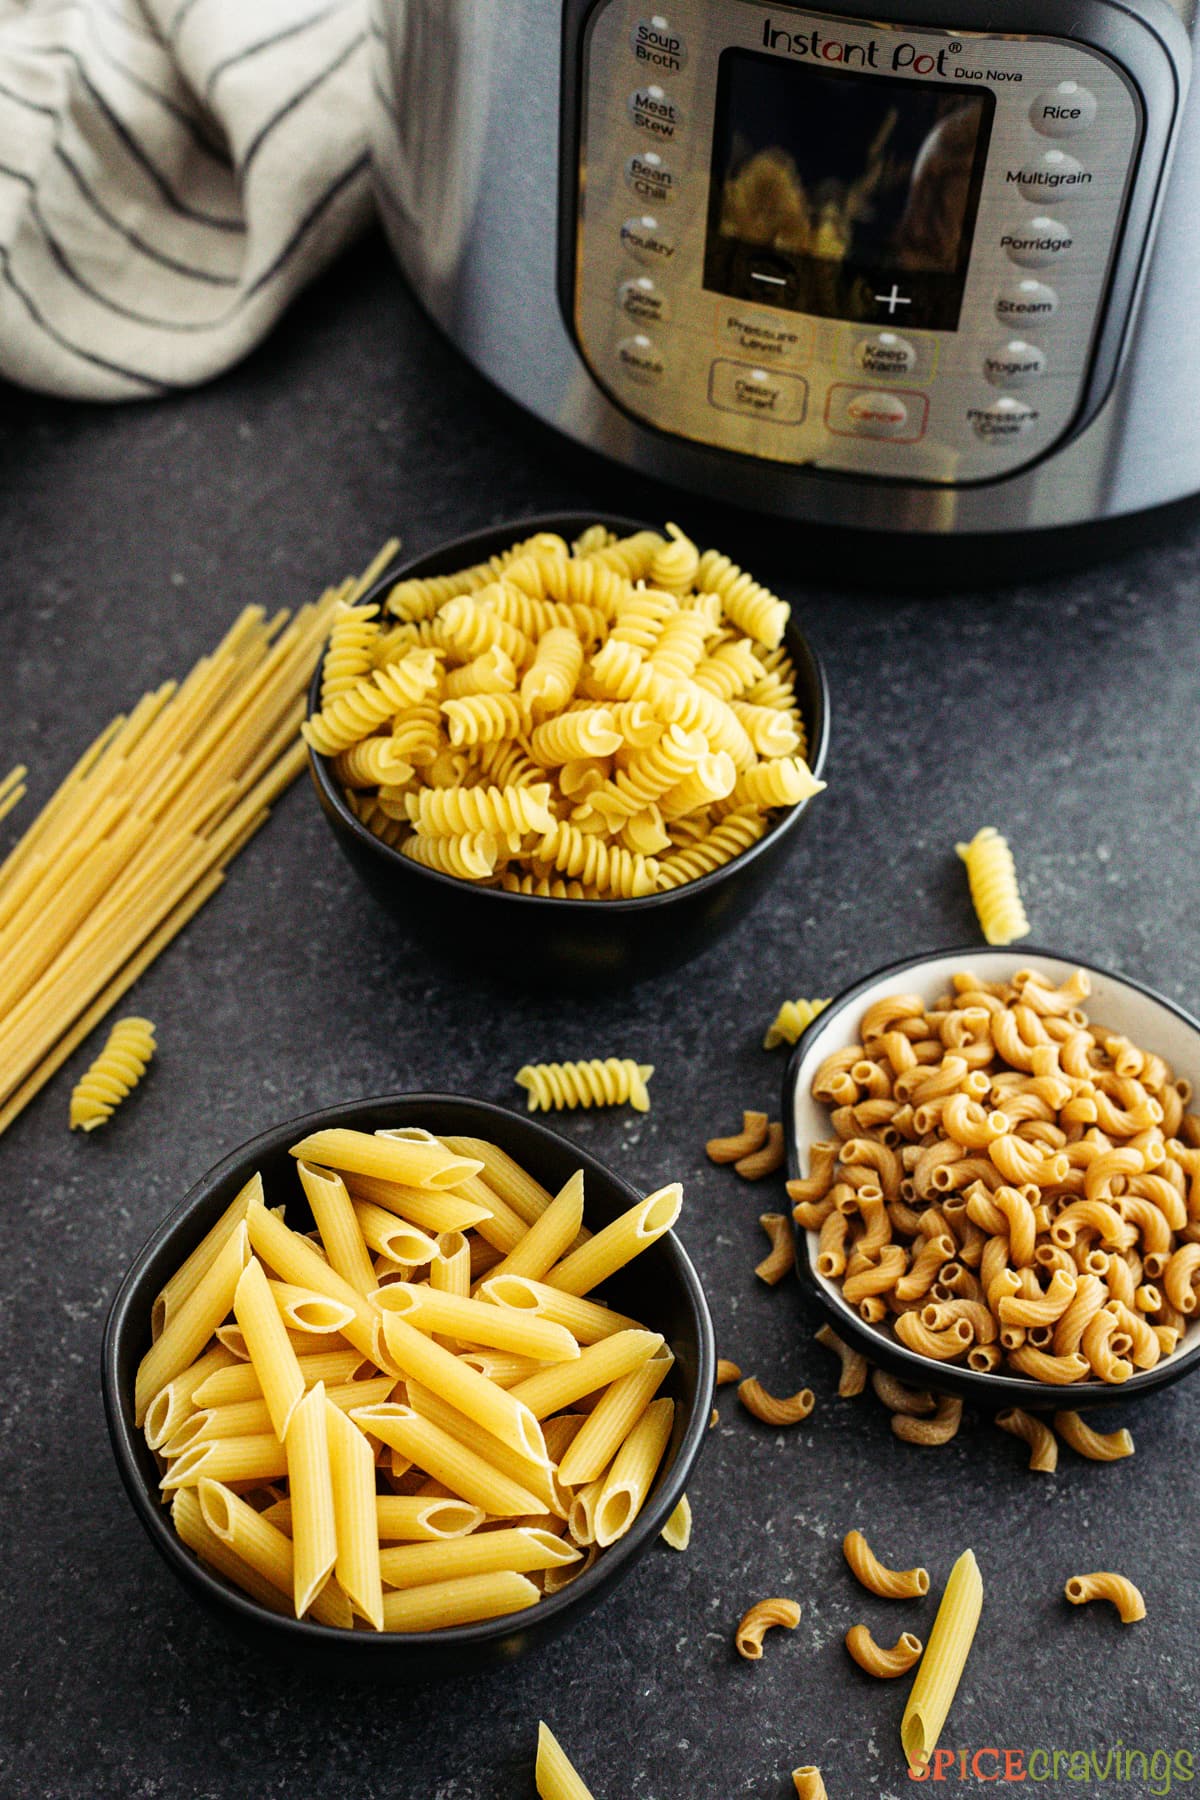 Three bowls of uncooked pasta next to an Instant Pot